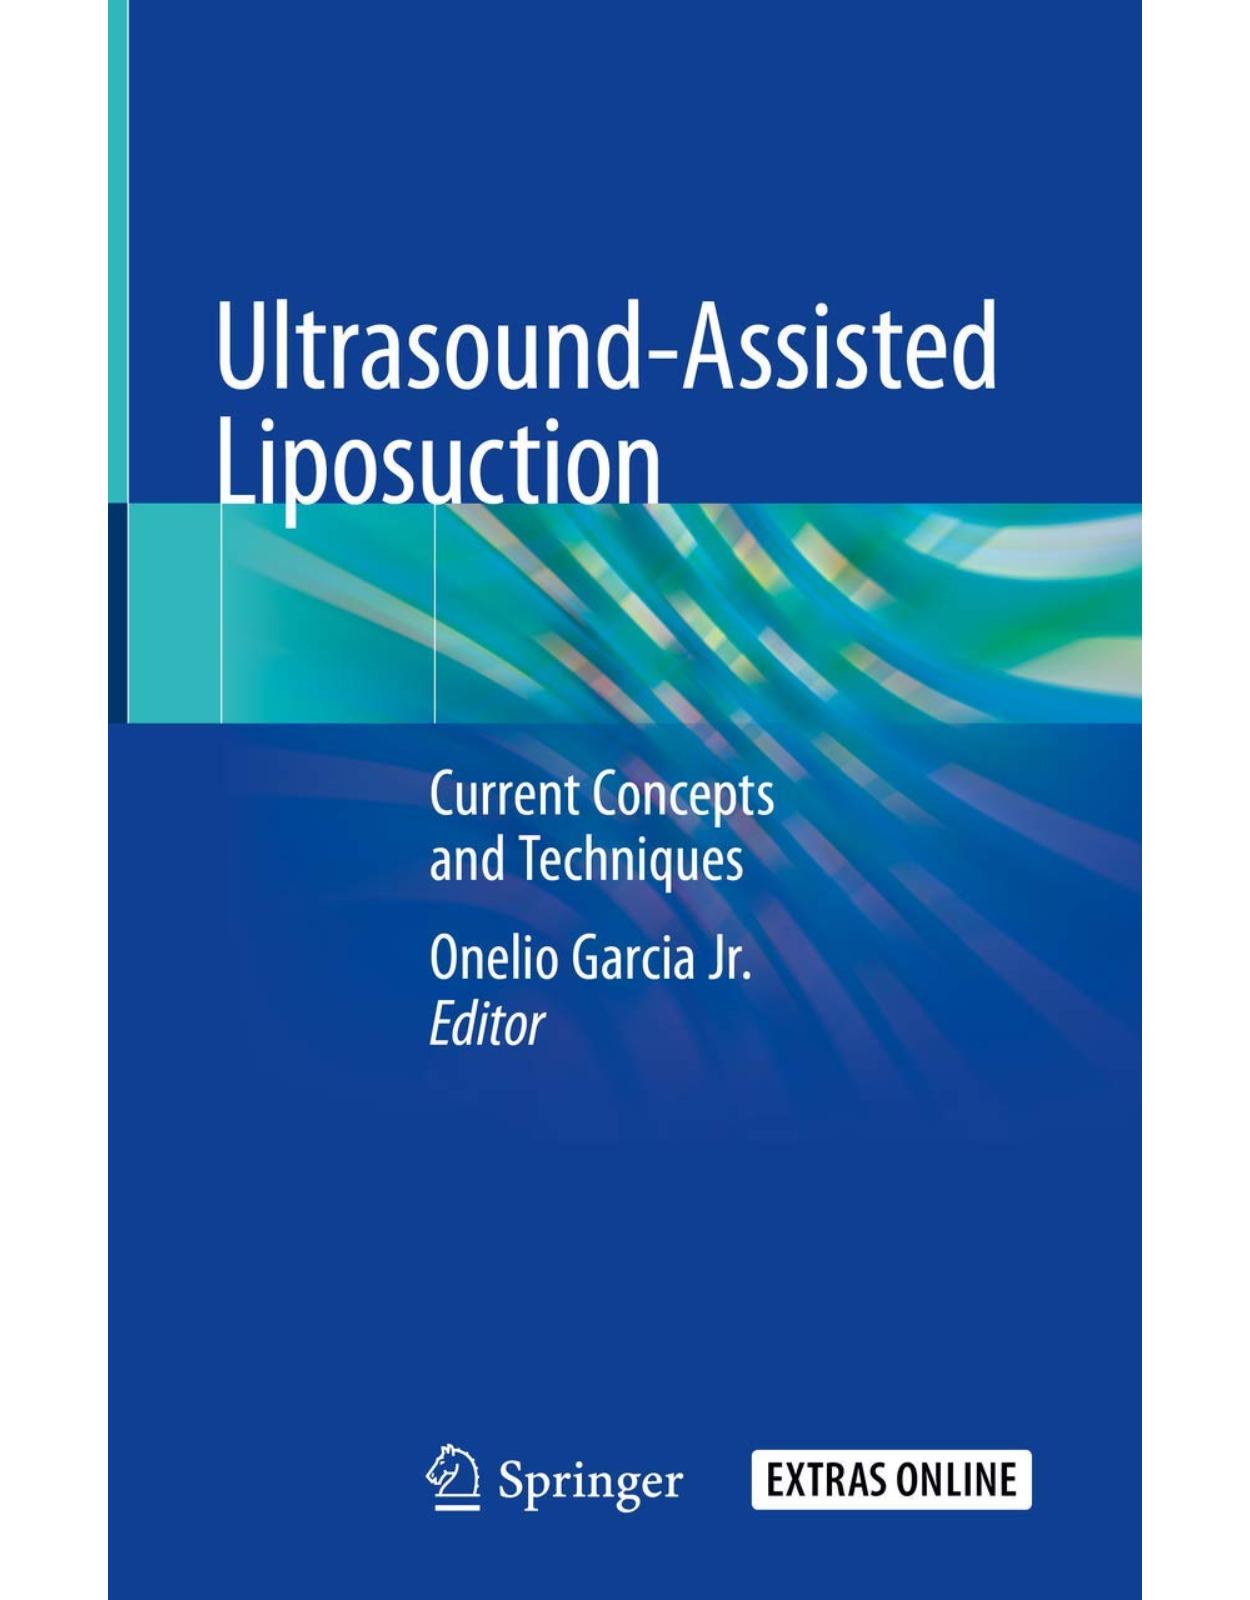 Ultrasound-Assisted Liposuction: Current Concepts and Techniques